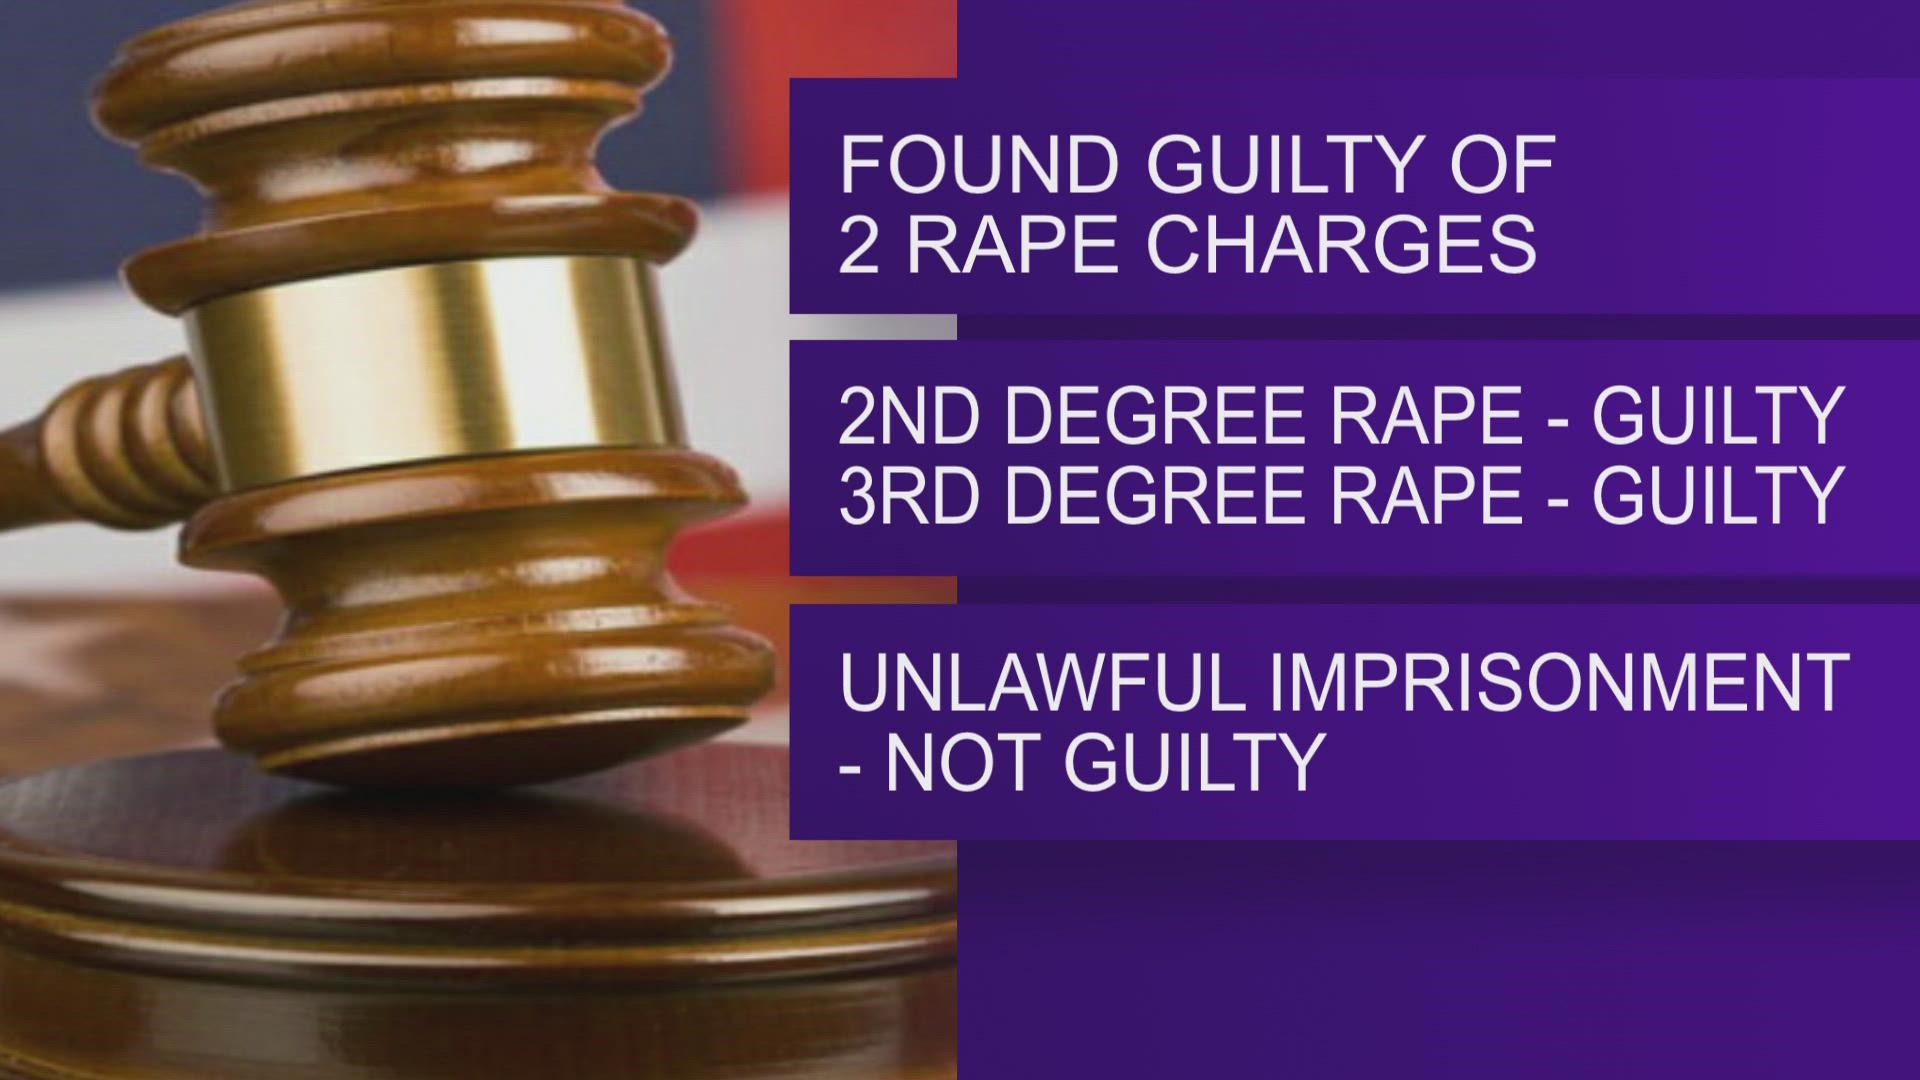 Nash was found guilty of second and third-degree rape on Tuesday evening. He was found not guilty of unlawful imprisonment.